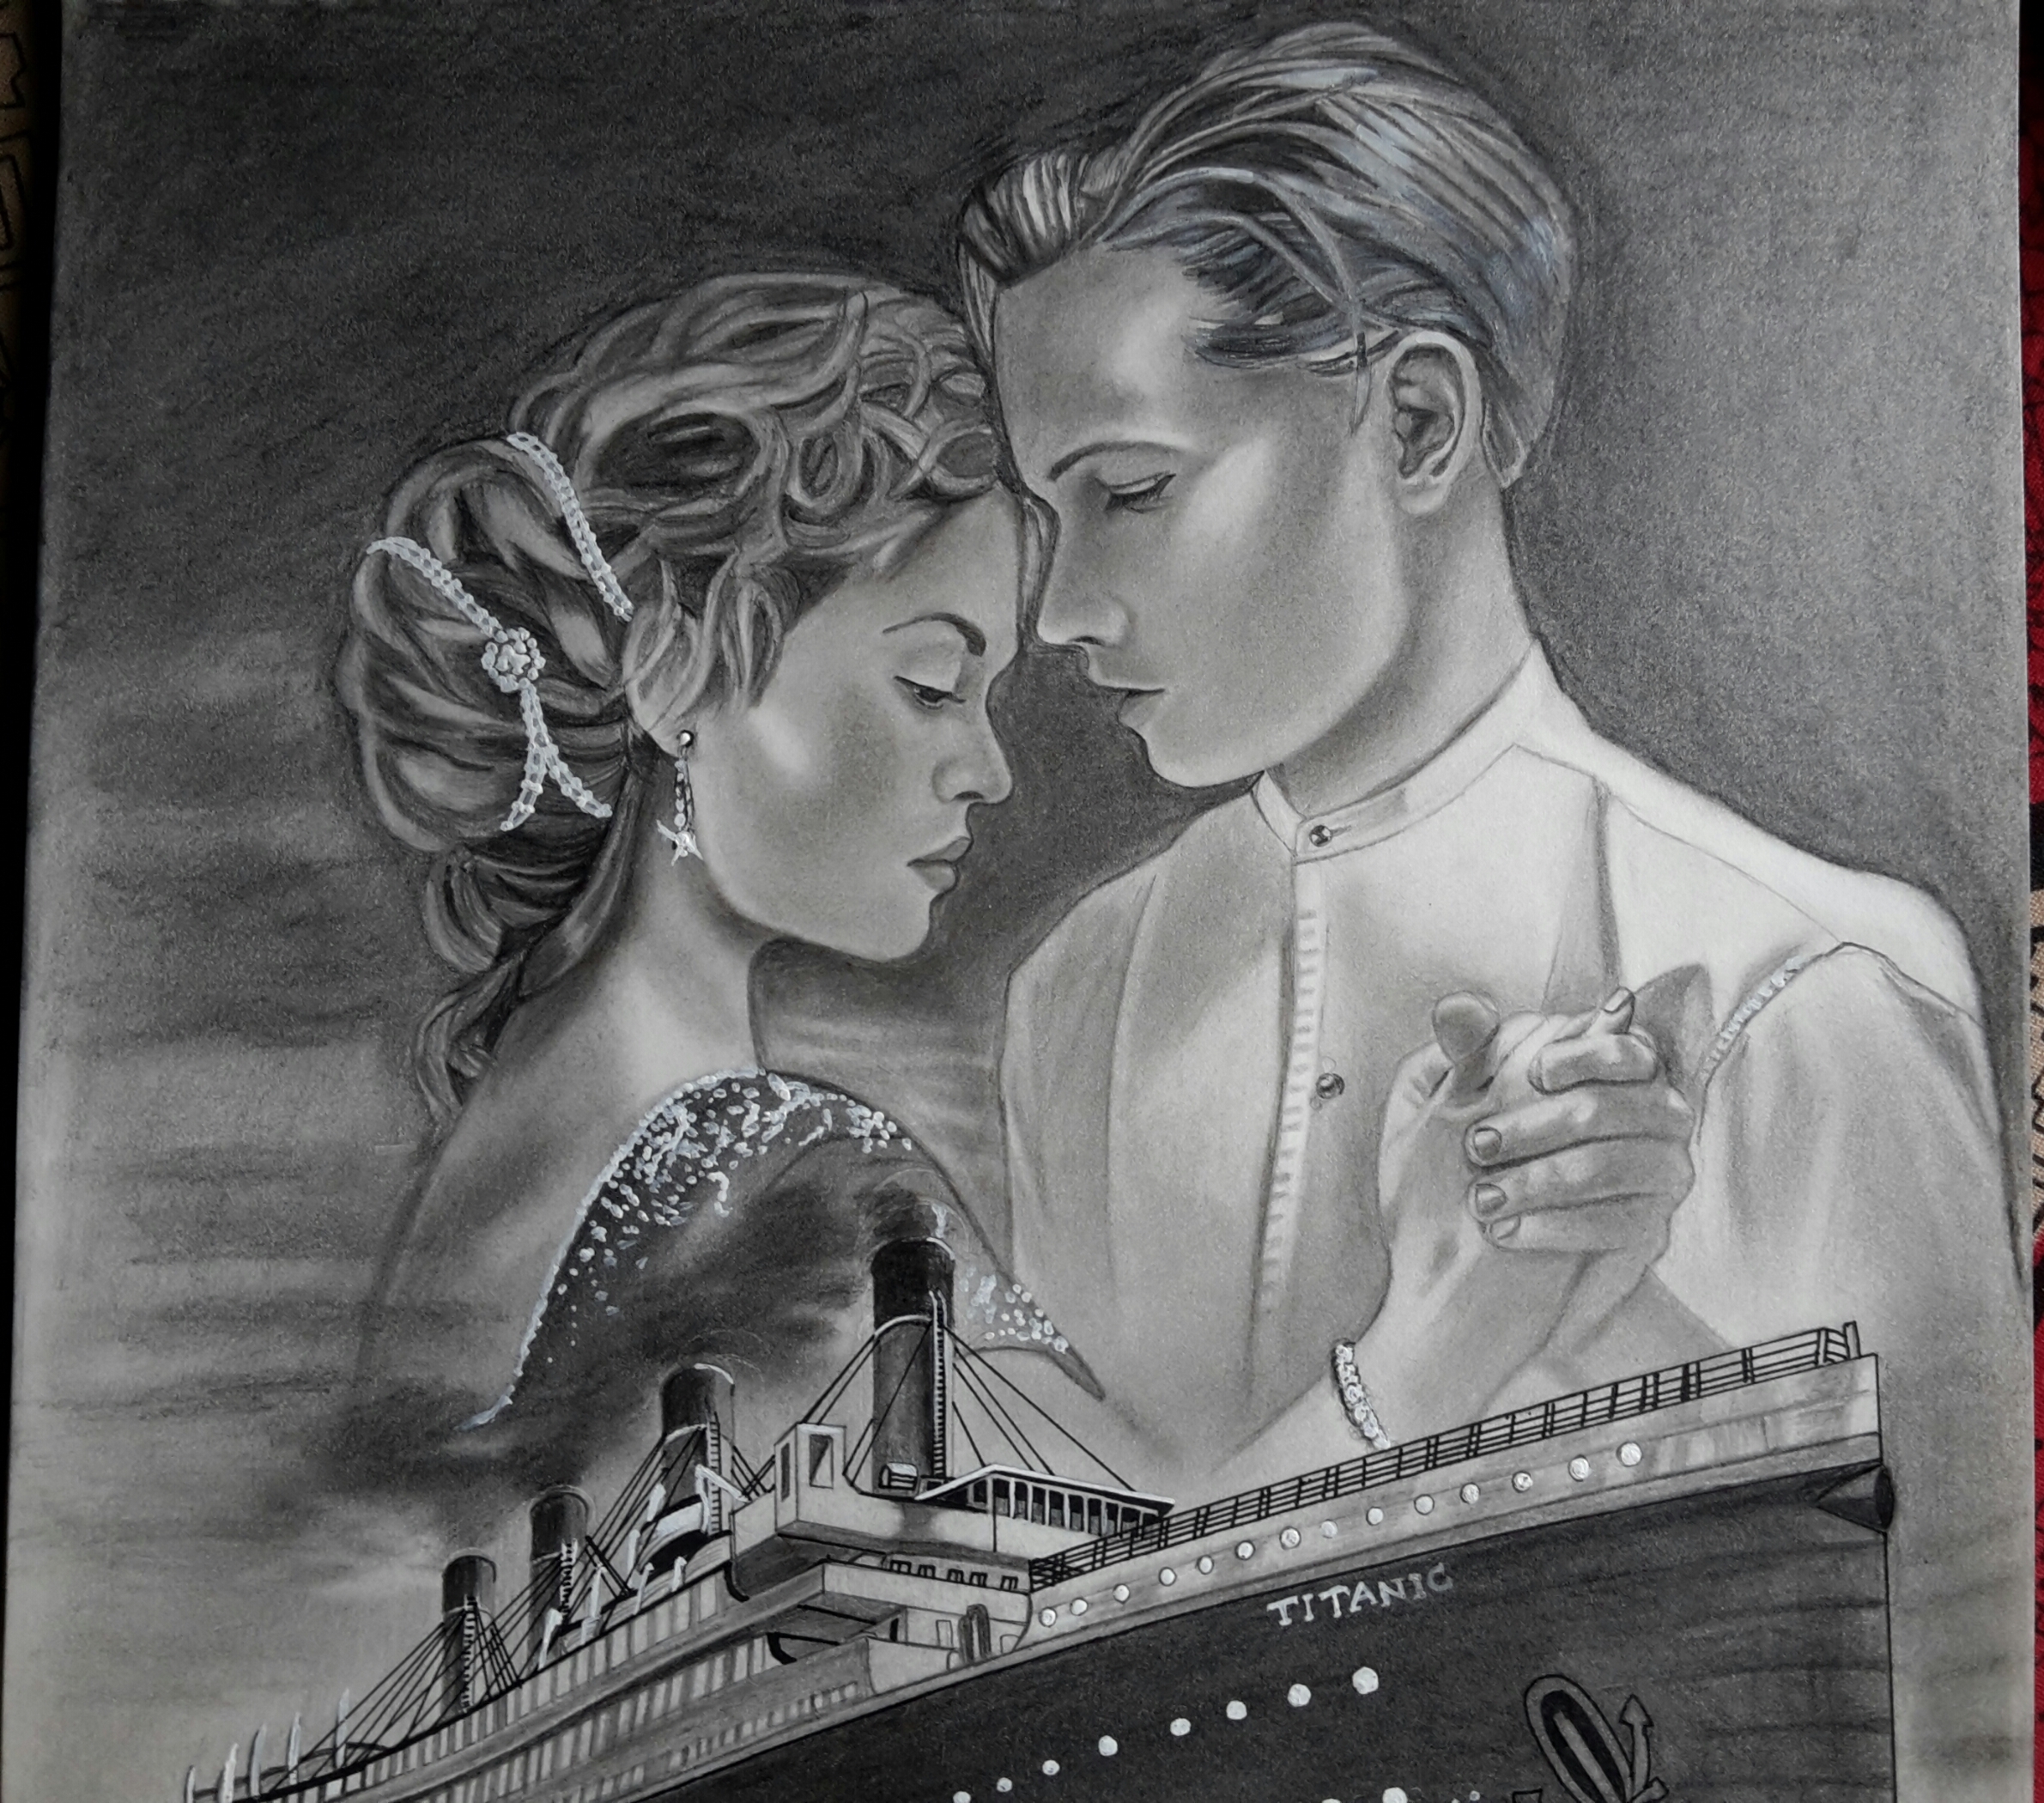 Titanic Drawing with kate winslet and leonardo dicaprio.